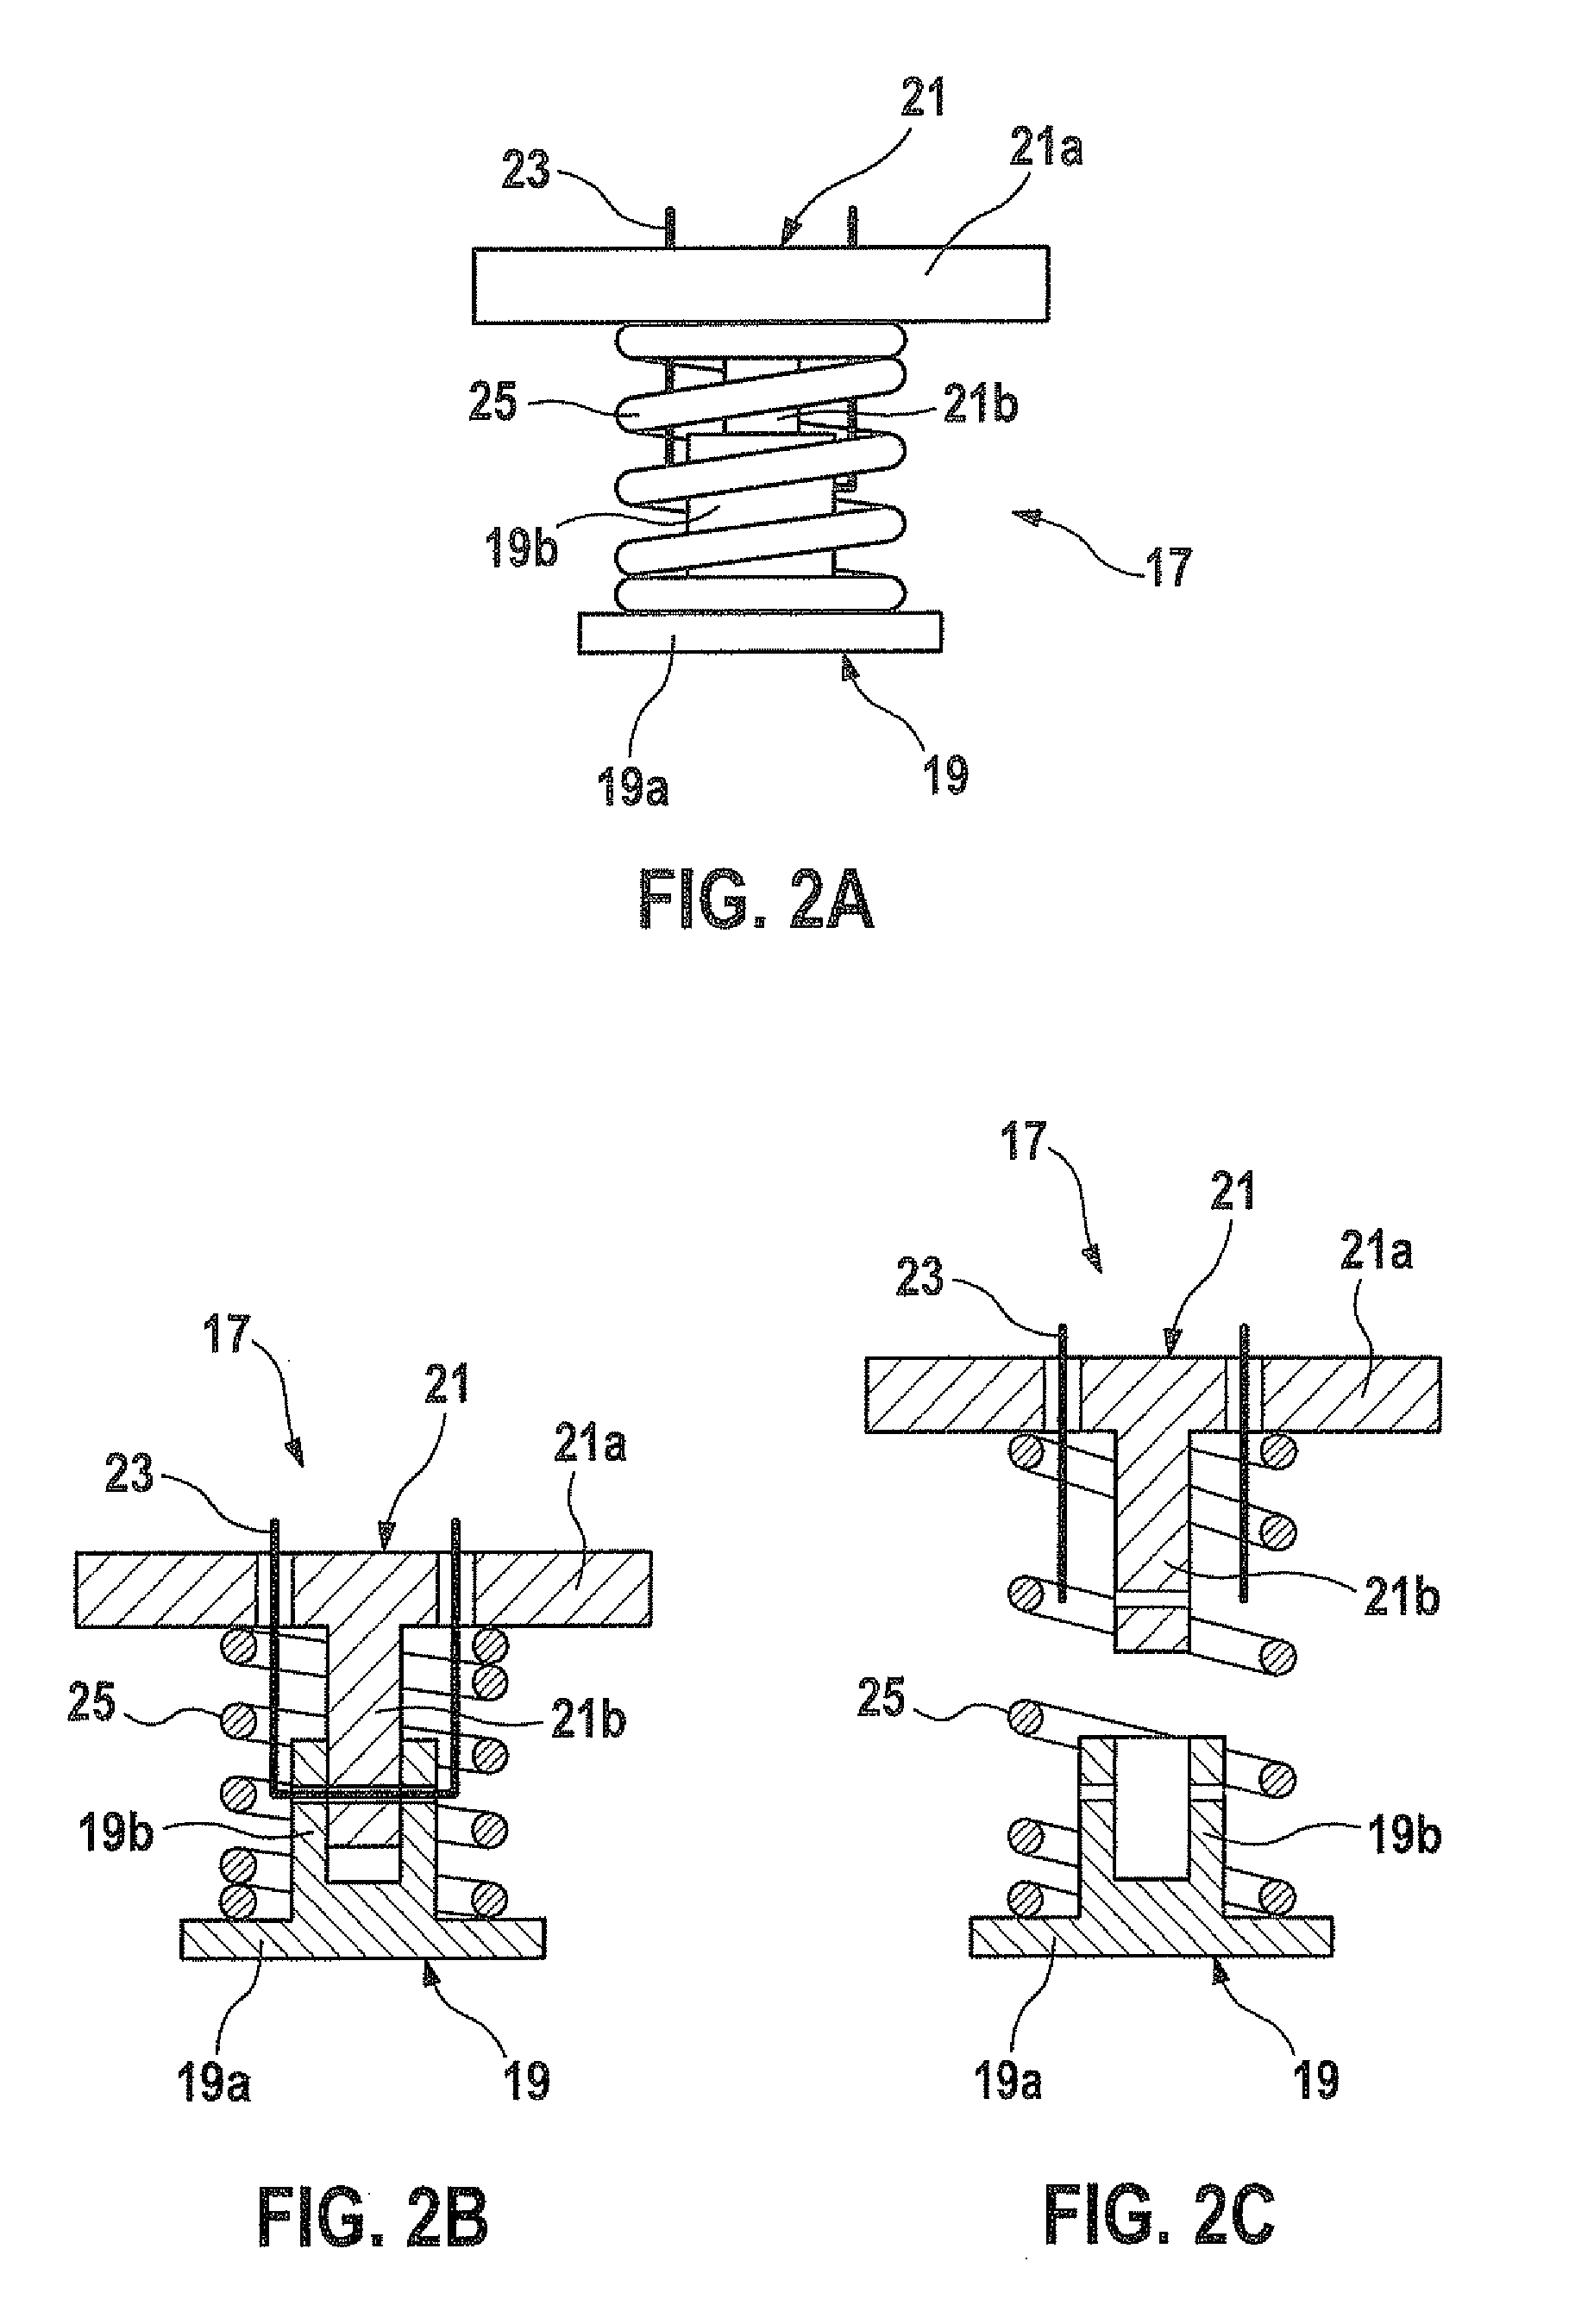 Junction box and solar cell array